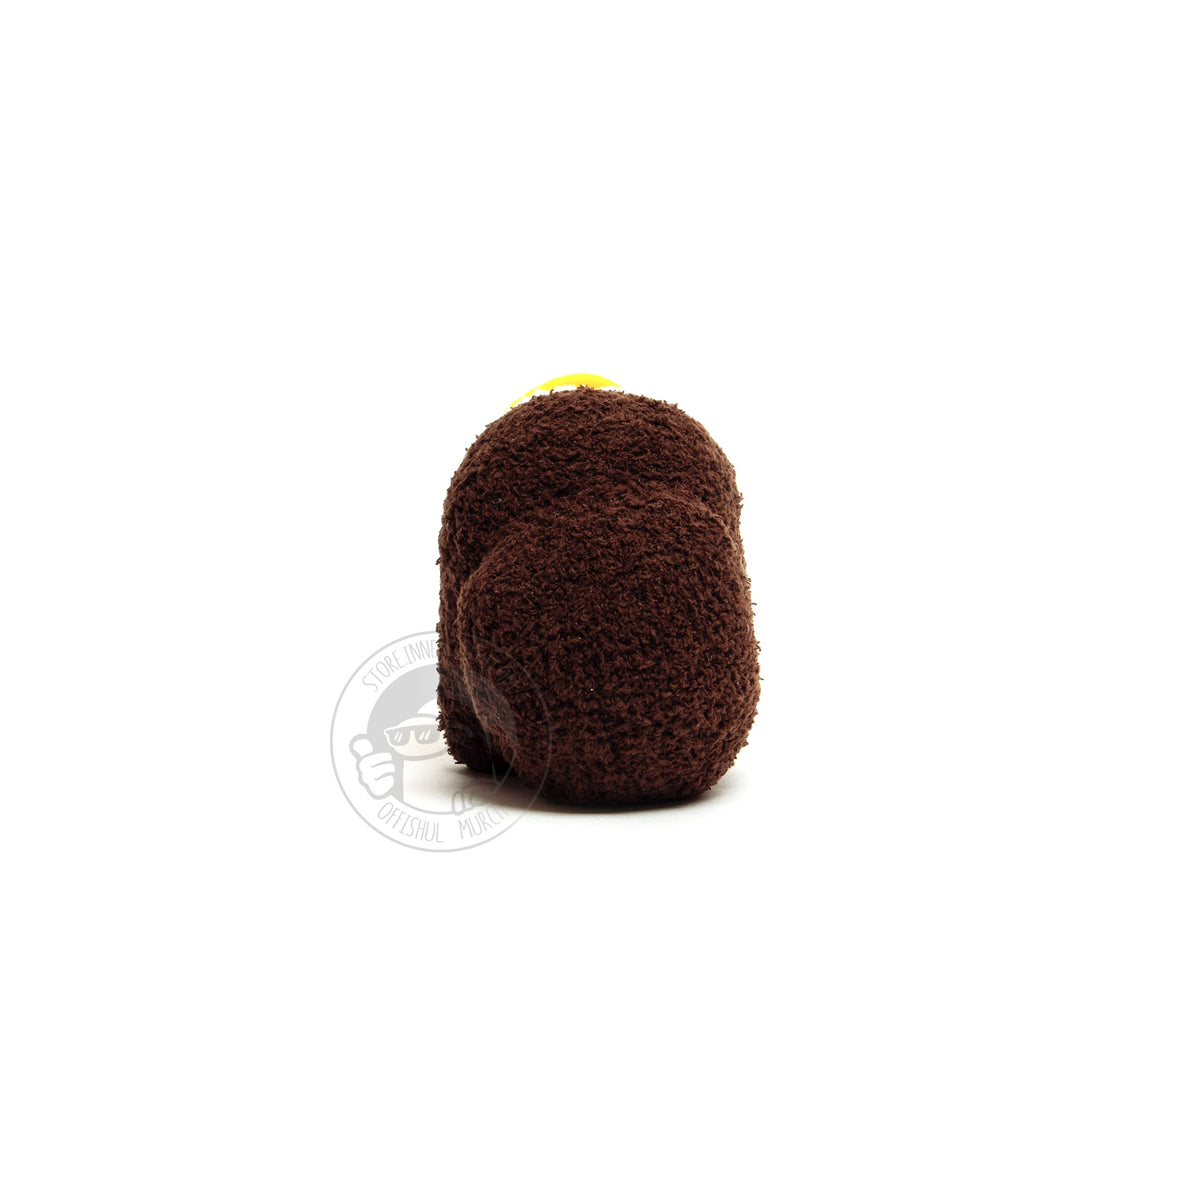 A back-view photograph of a small, brown, fuzzy, Crewmate  on a white background. From this angle you can see the Crewmate’s big, round, and thick backpack in full view.